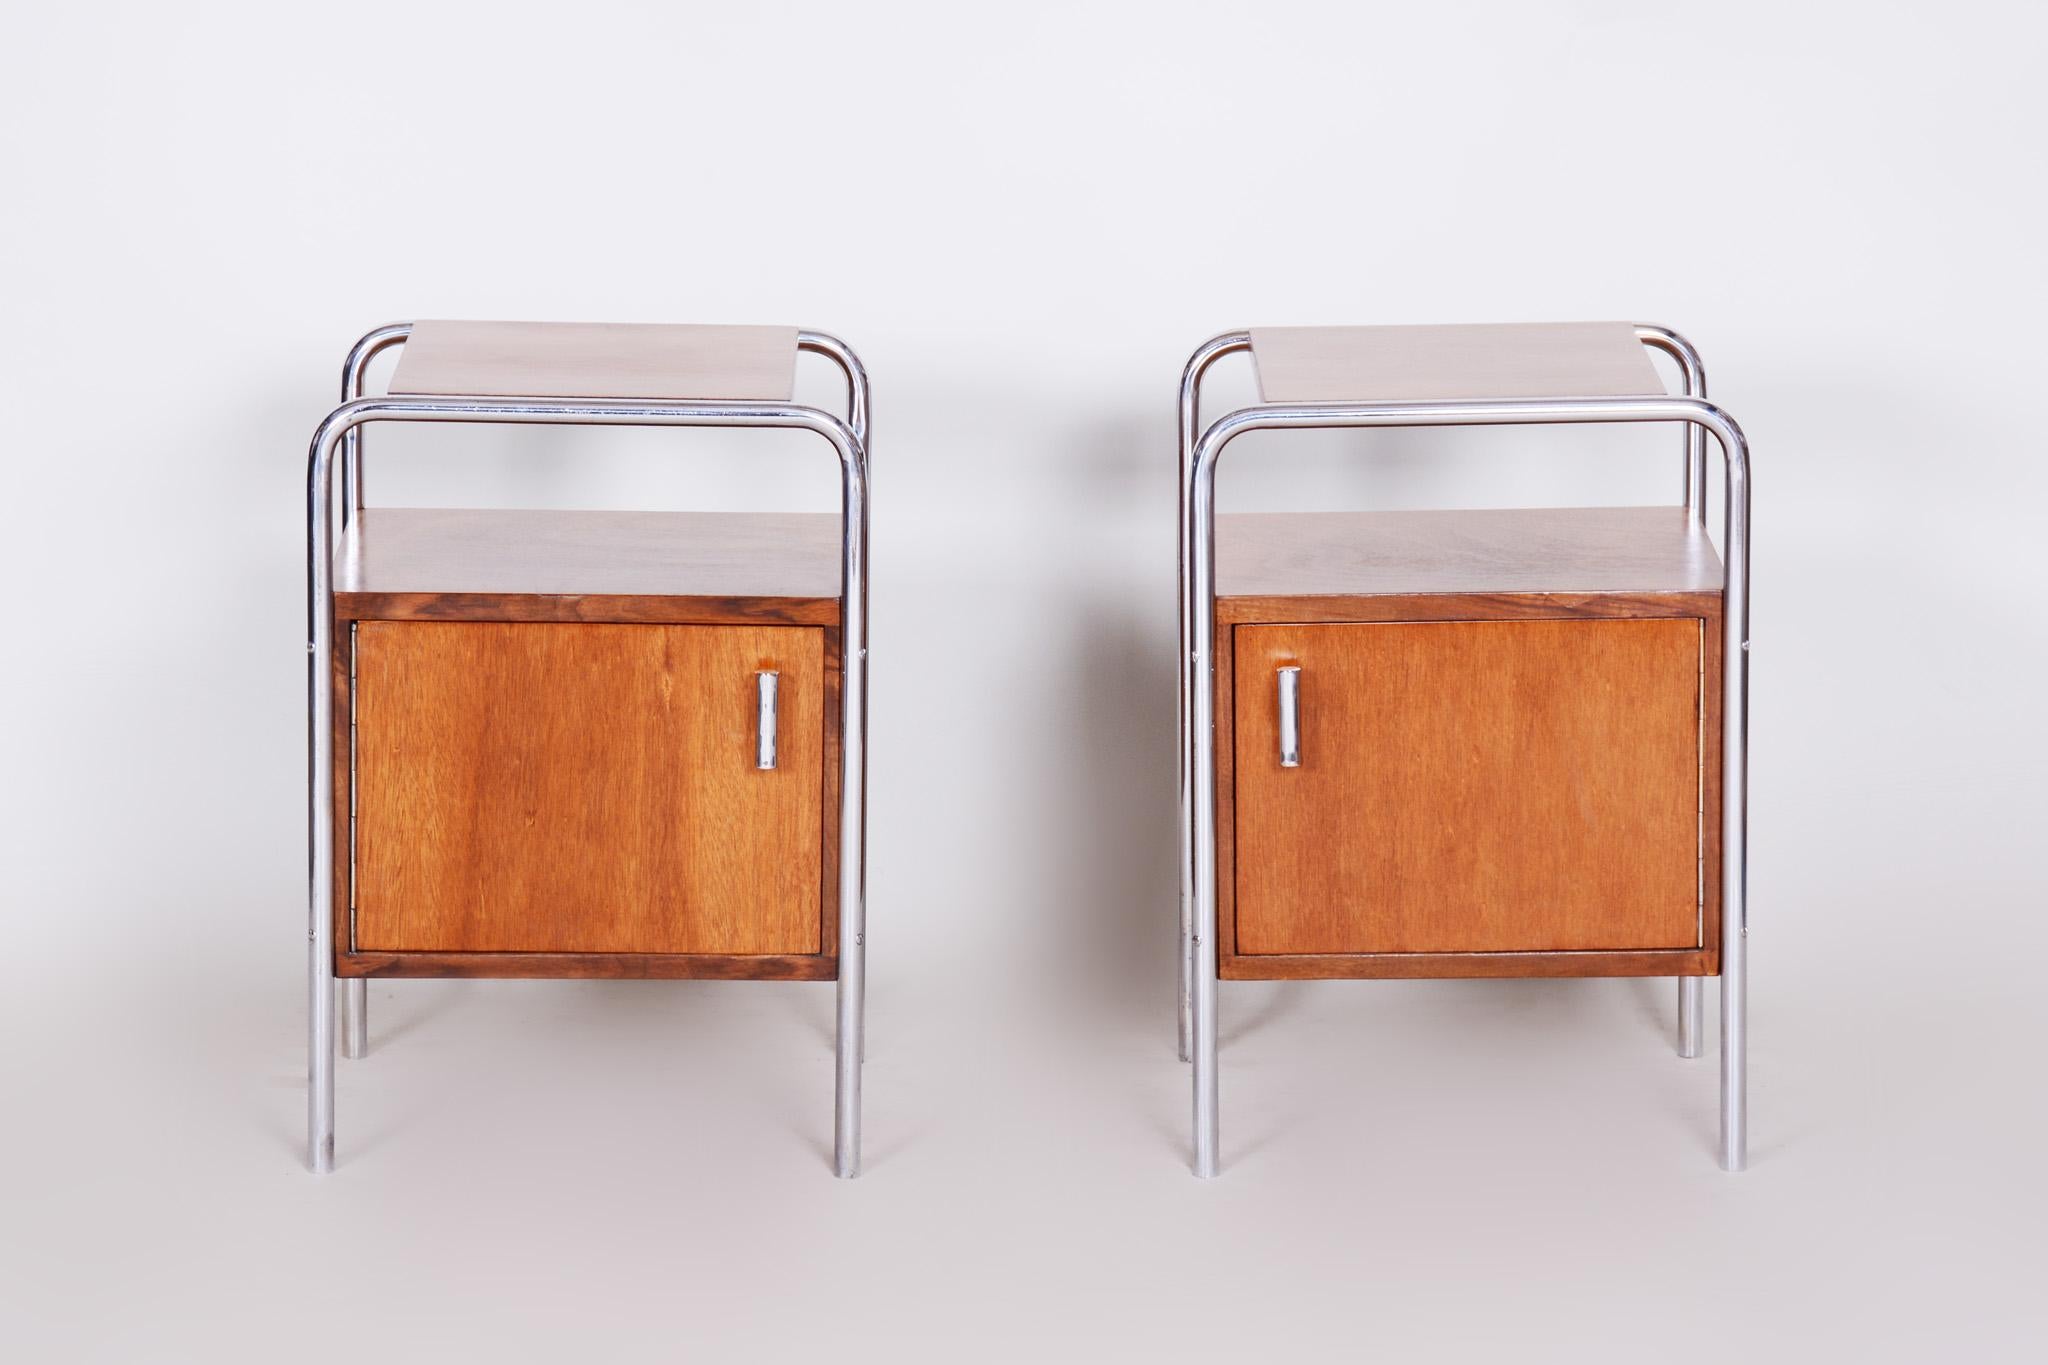 Pair of Bauhaus bed-side tables from Czechia.
Completely restored.
Material: Macassar and chrome-plated steel

Maker: Robert Slezak
Period: 1930-1939.